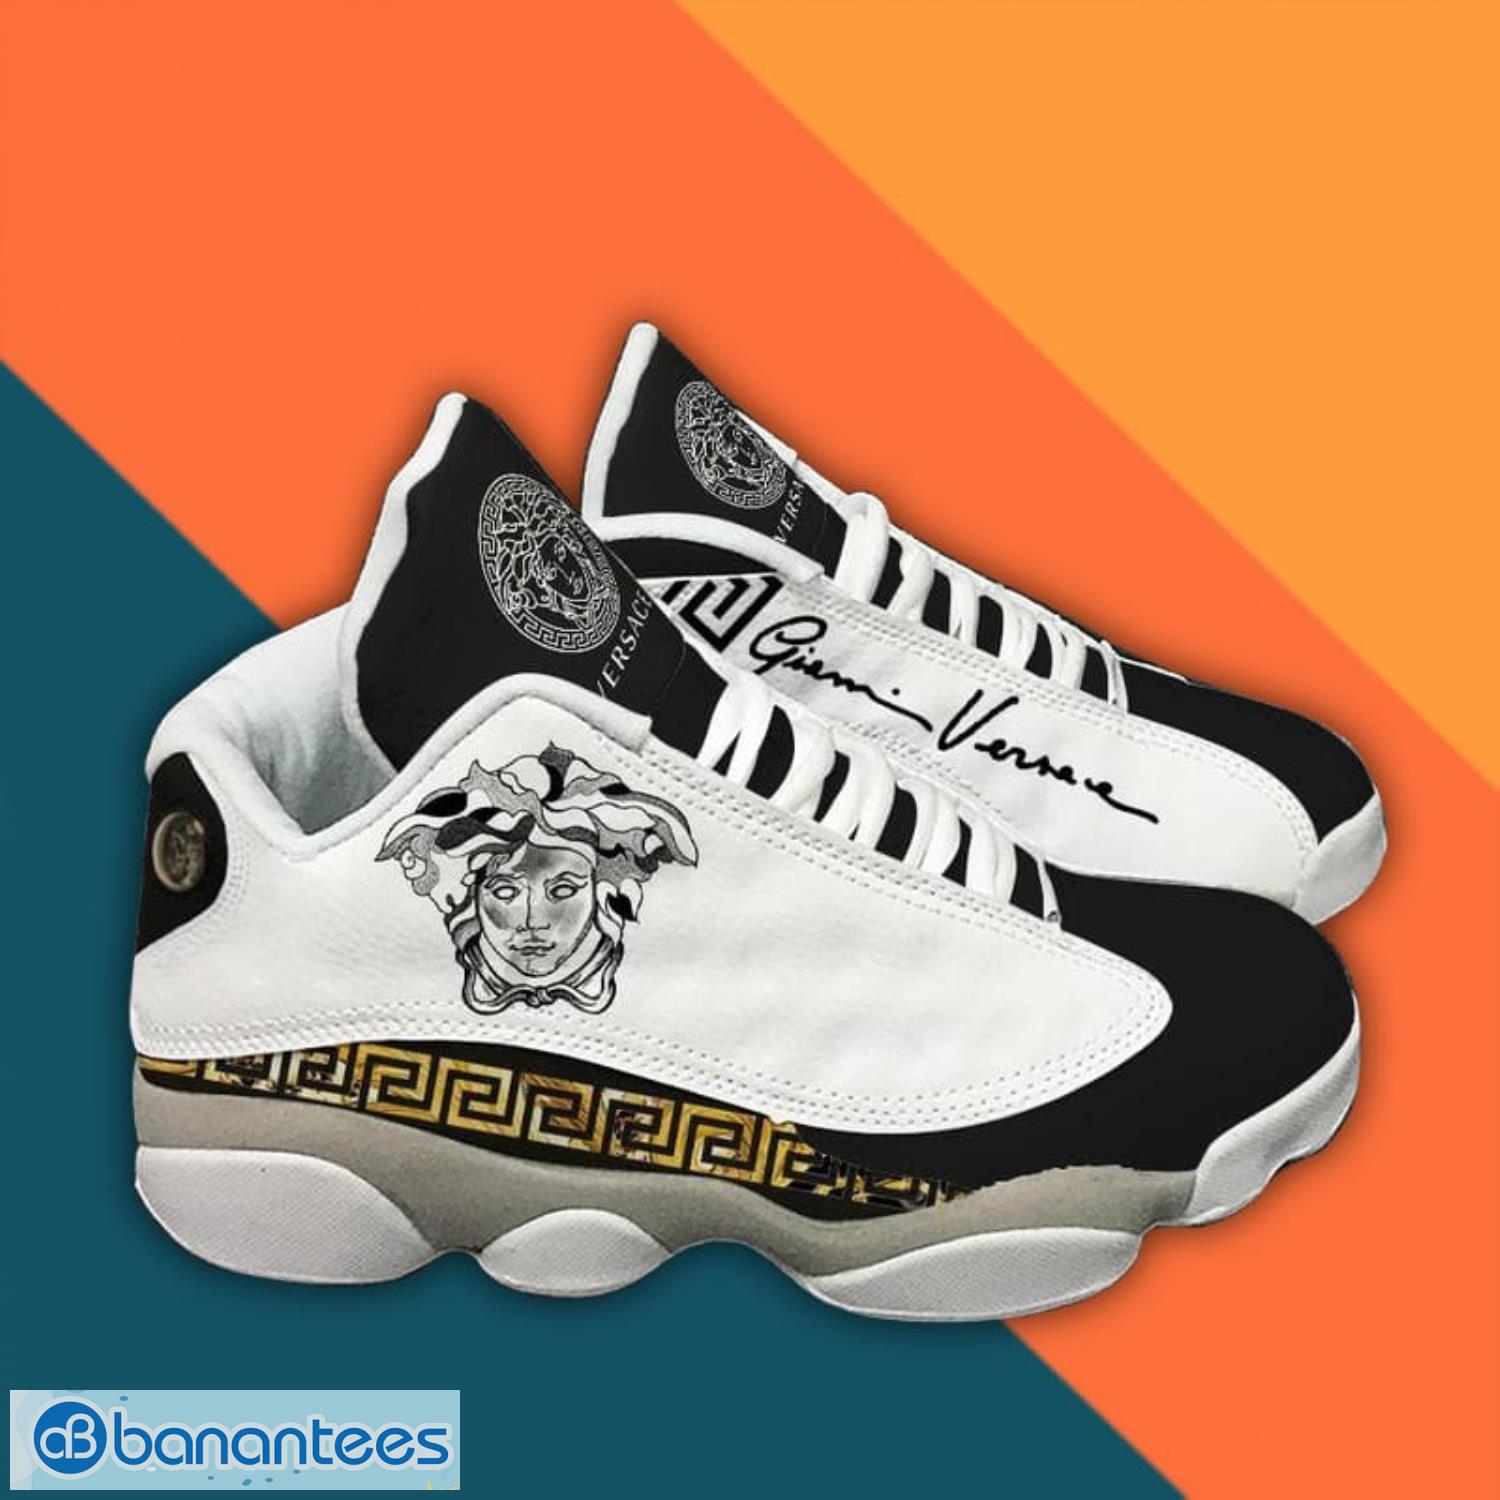 Versace Black And White Air Jordan 13 Sneaker Shoes Product Photo 3